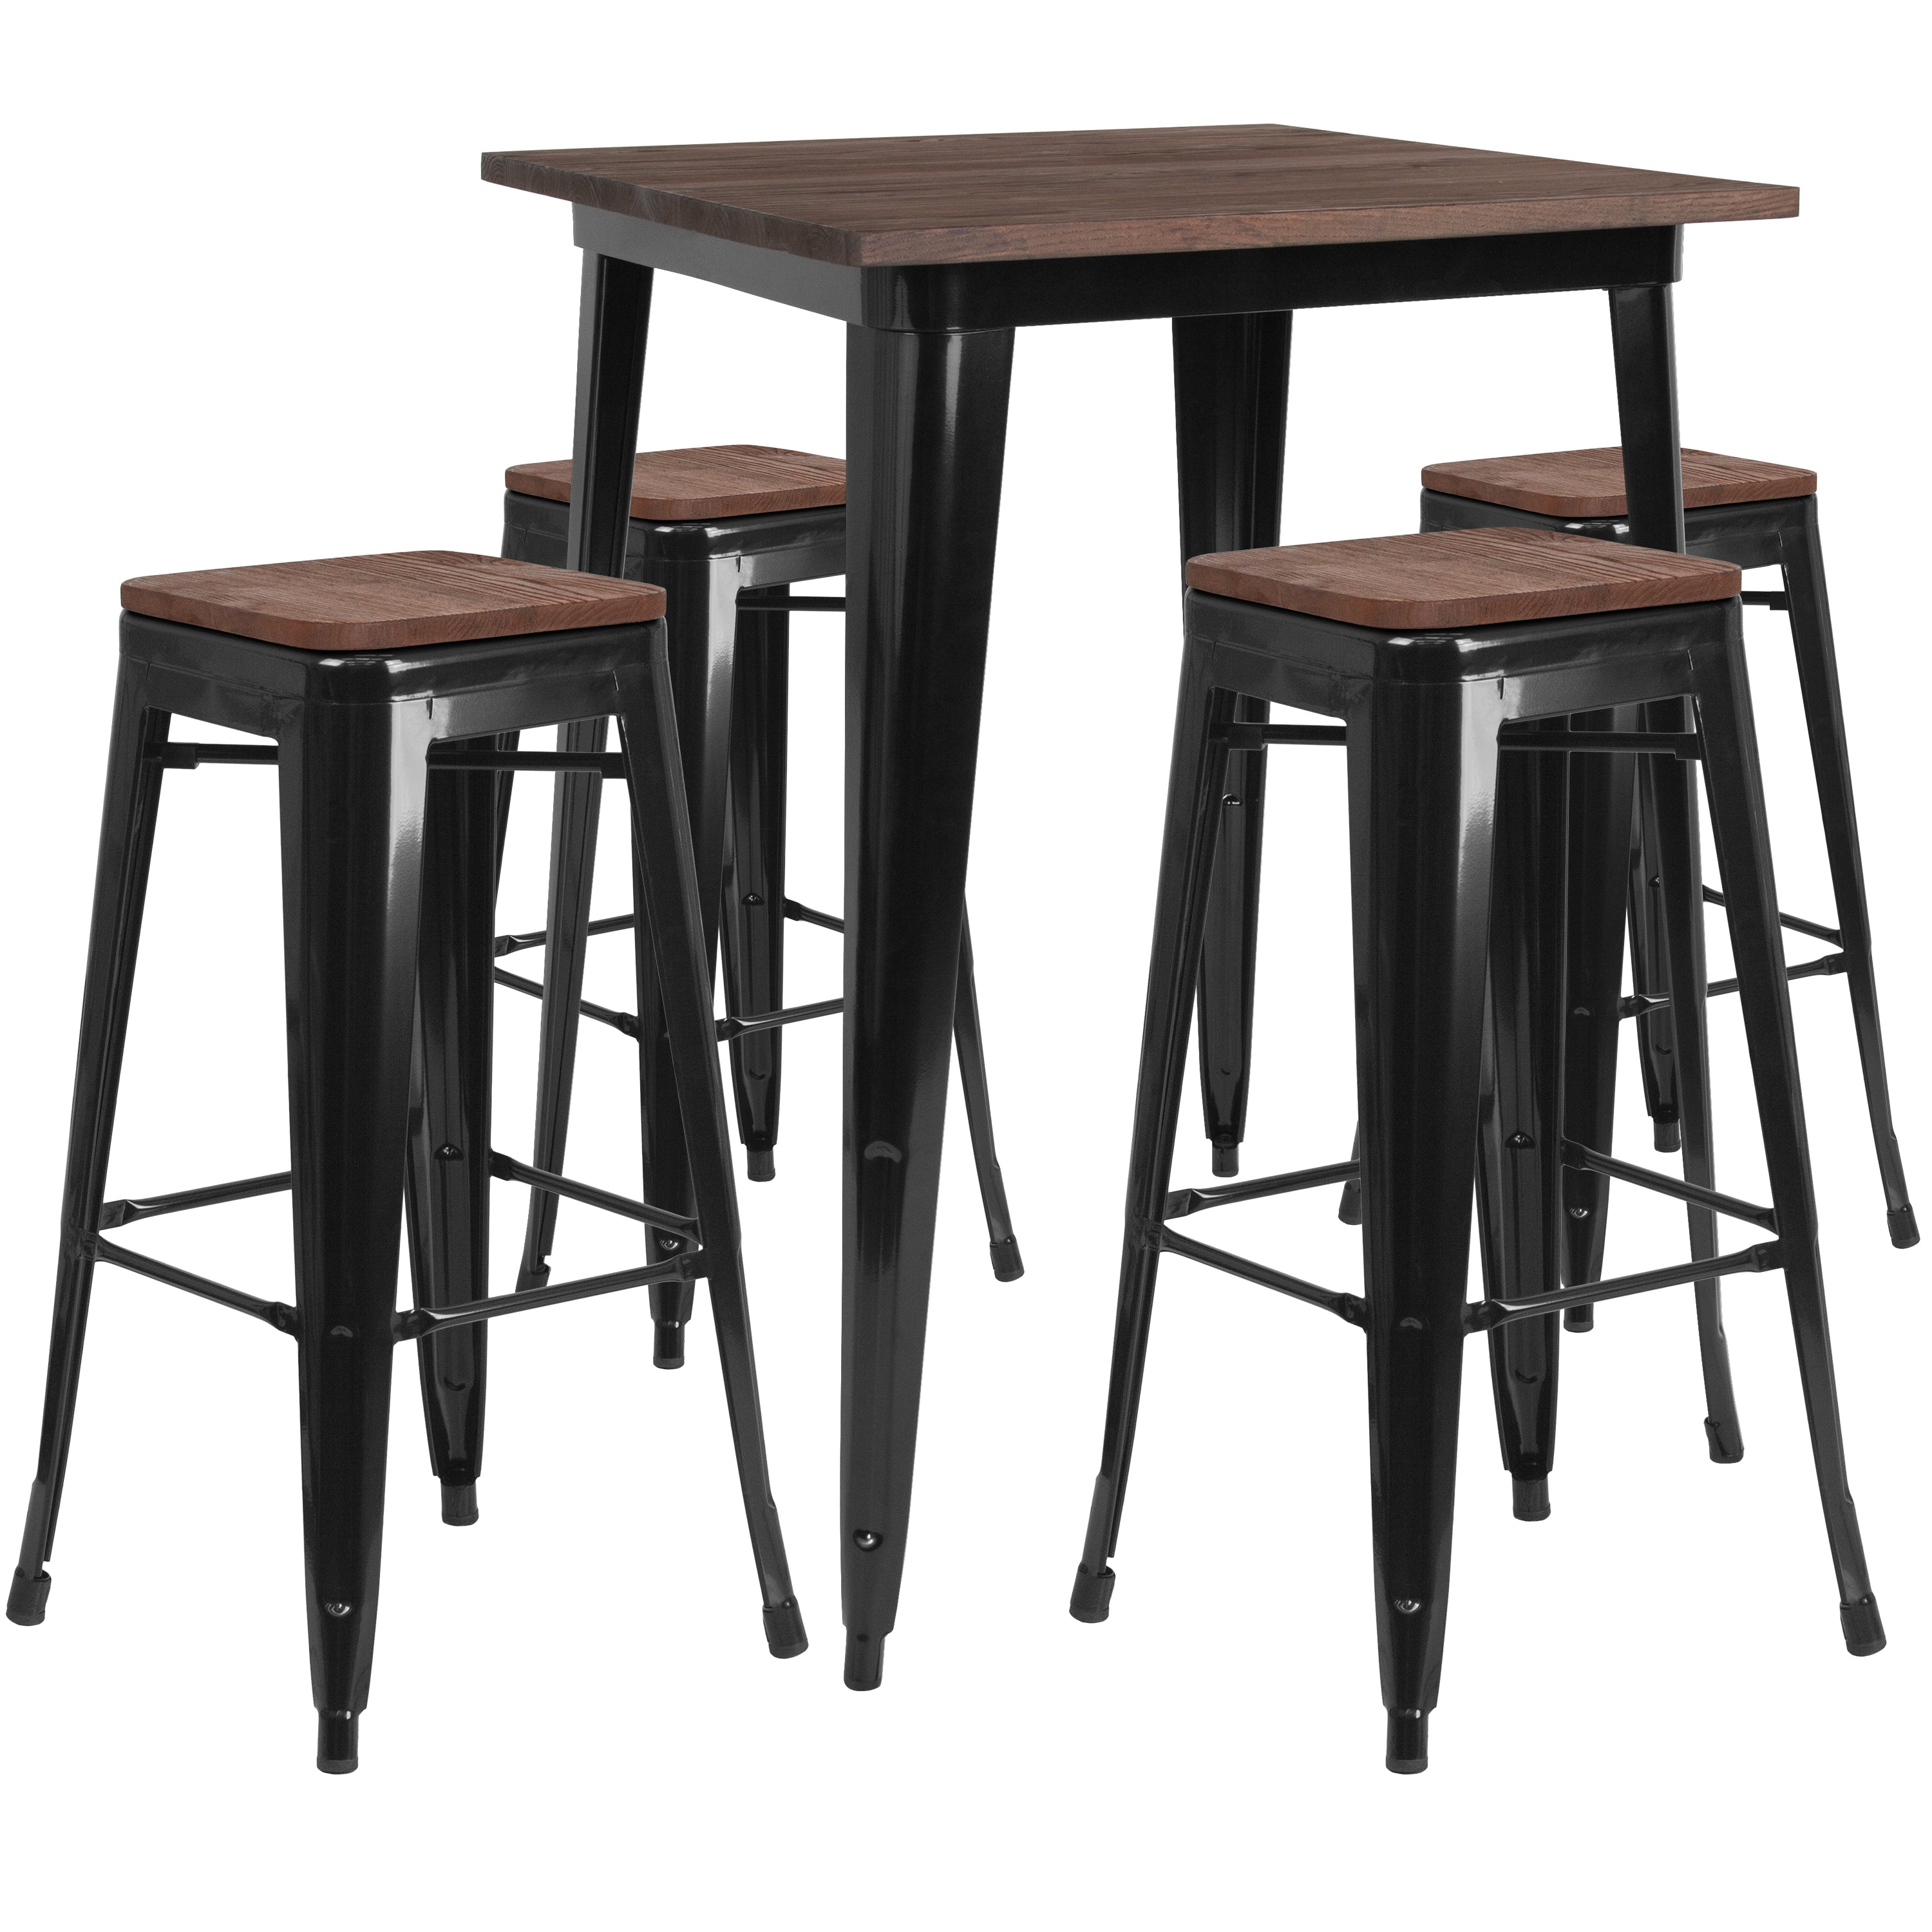 31.5" Square Metal Bar Table Set with Wood Top and 4 Backless Stools-Metal/ Colorful Bar Table and Stool Set-Flash Furniture-Wall2Wall Furnishings